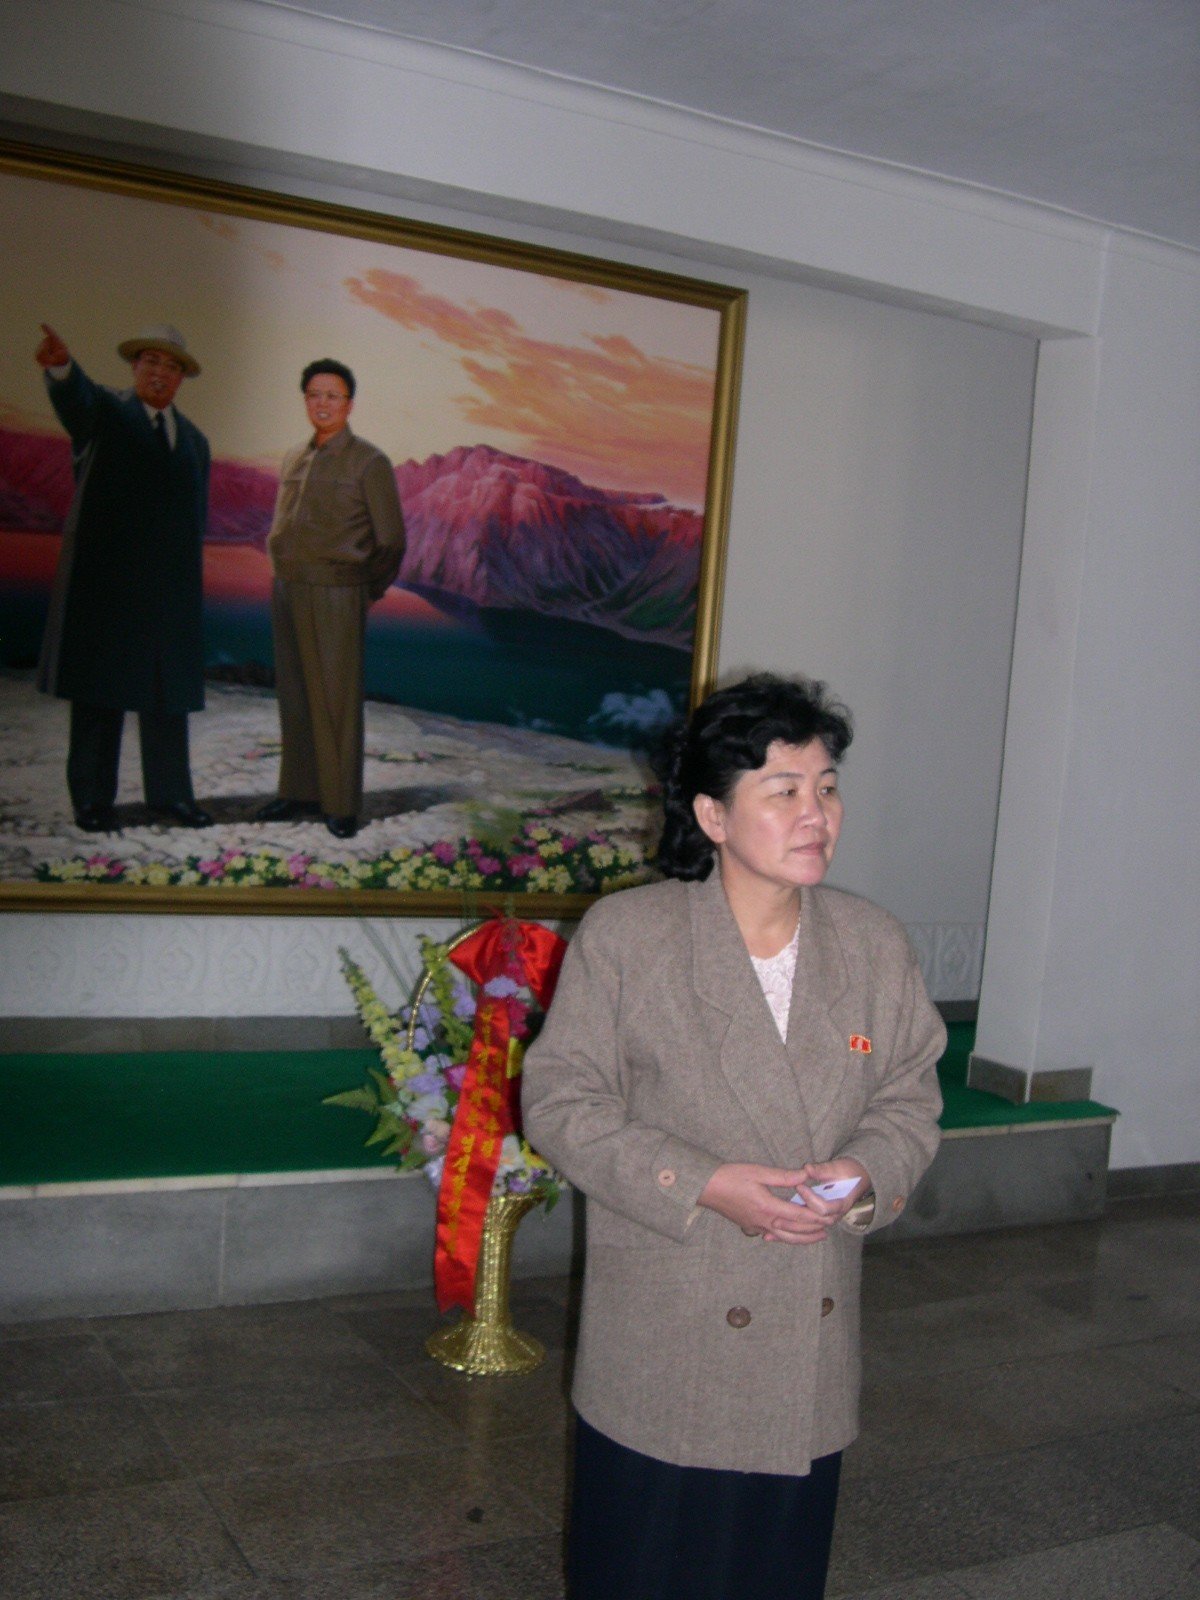 Korean woman in skirt suit is standing in front of a large wall painting of two North Korea leaders